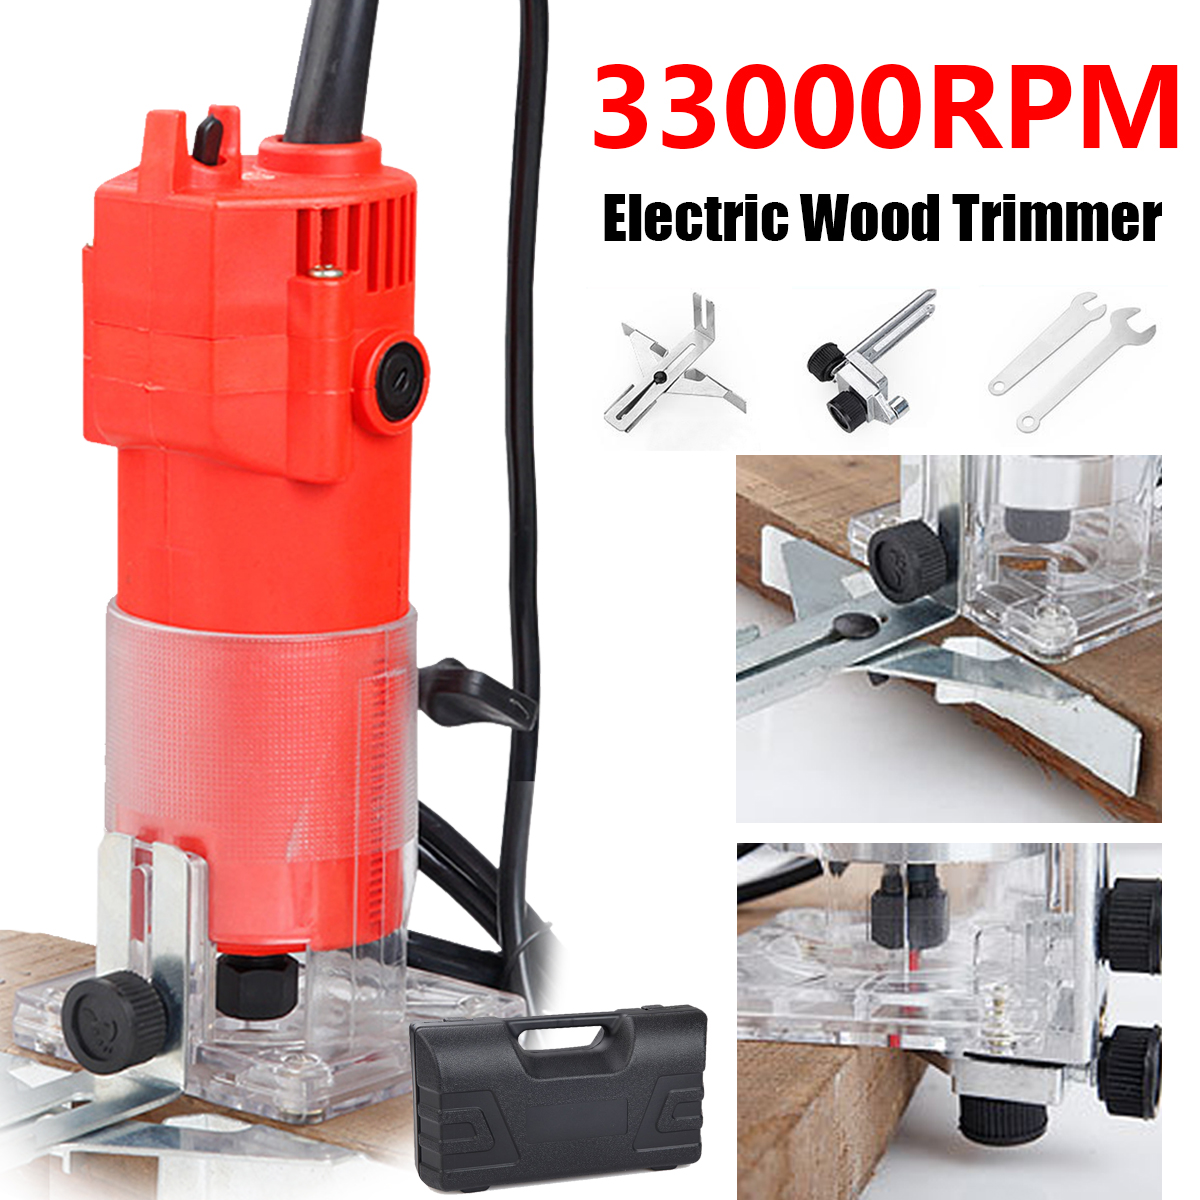 110V220V-2300W-Electric-Hand-Trimmer-Router-Wood-Laminate-Palm-Joiners-Working-Cutting-Machine-1735596-1